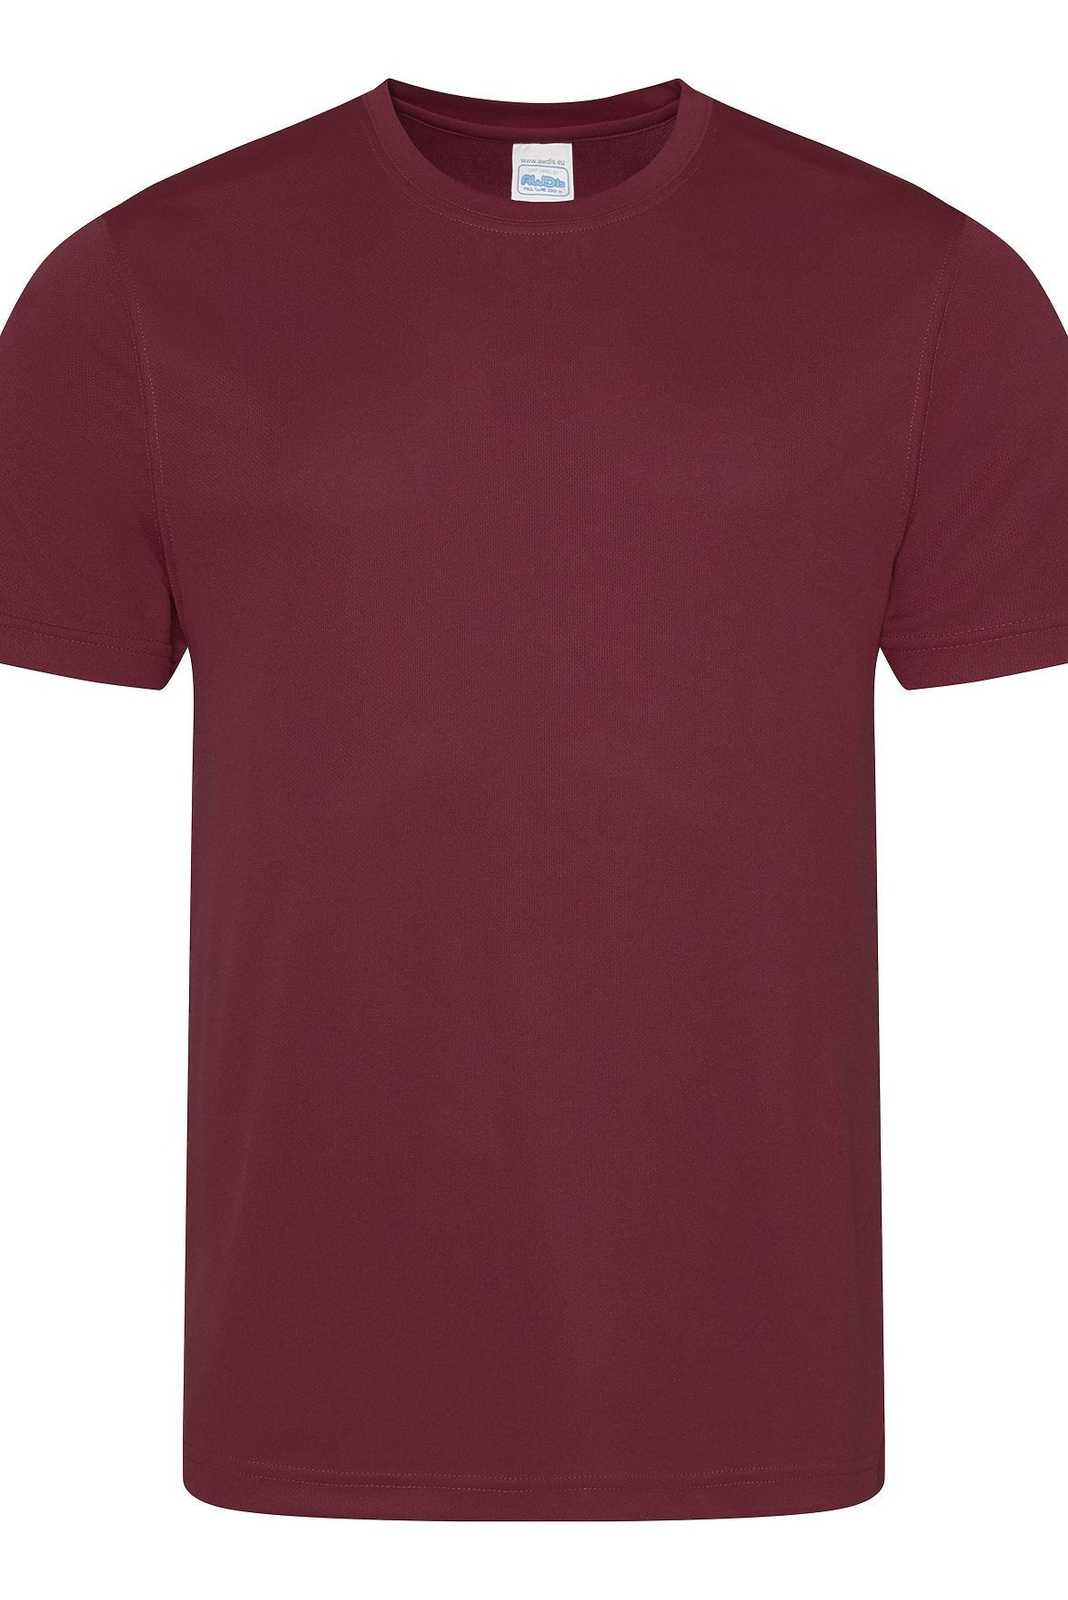 Just Cool JCA001 Cool Tee - Burgundy - HIT a Double